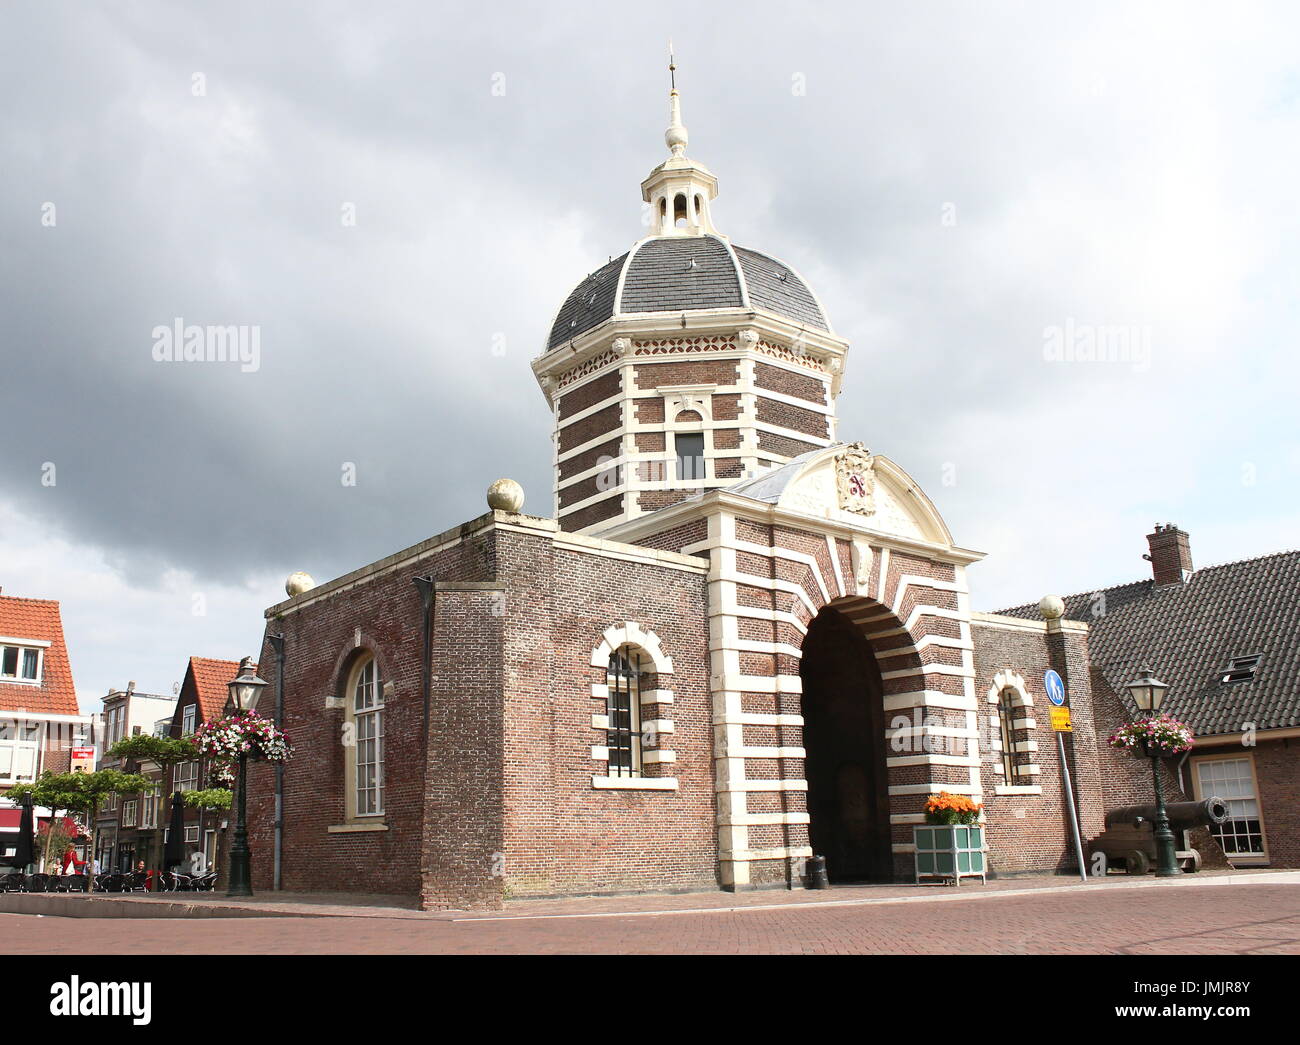 17th century Morspoort, western city gate in Leiden, The Netherlands. Designed in classical style by architect Willem van der Helm. Stock Photo